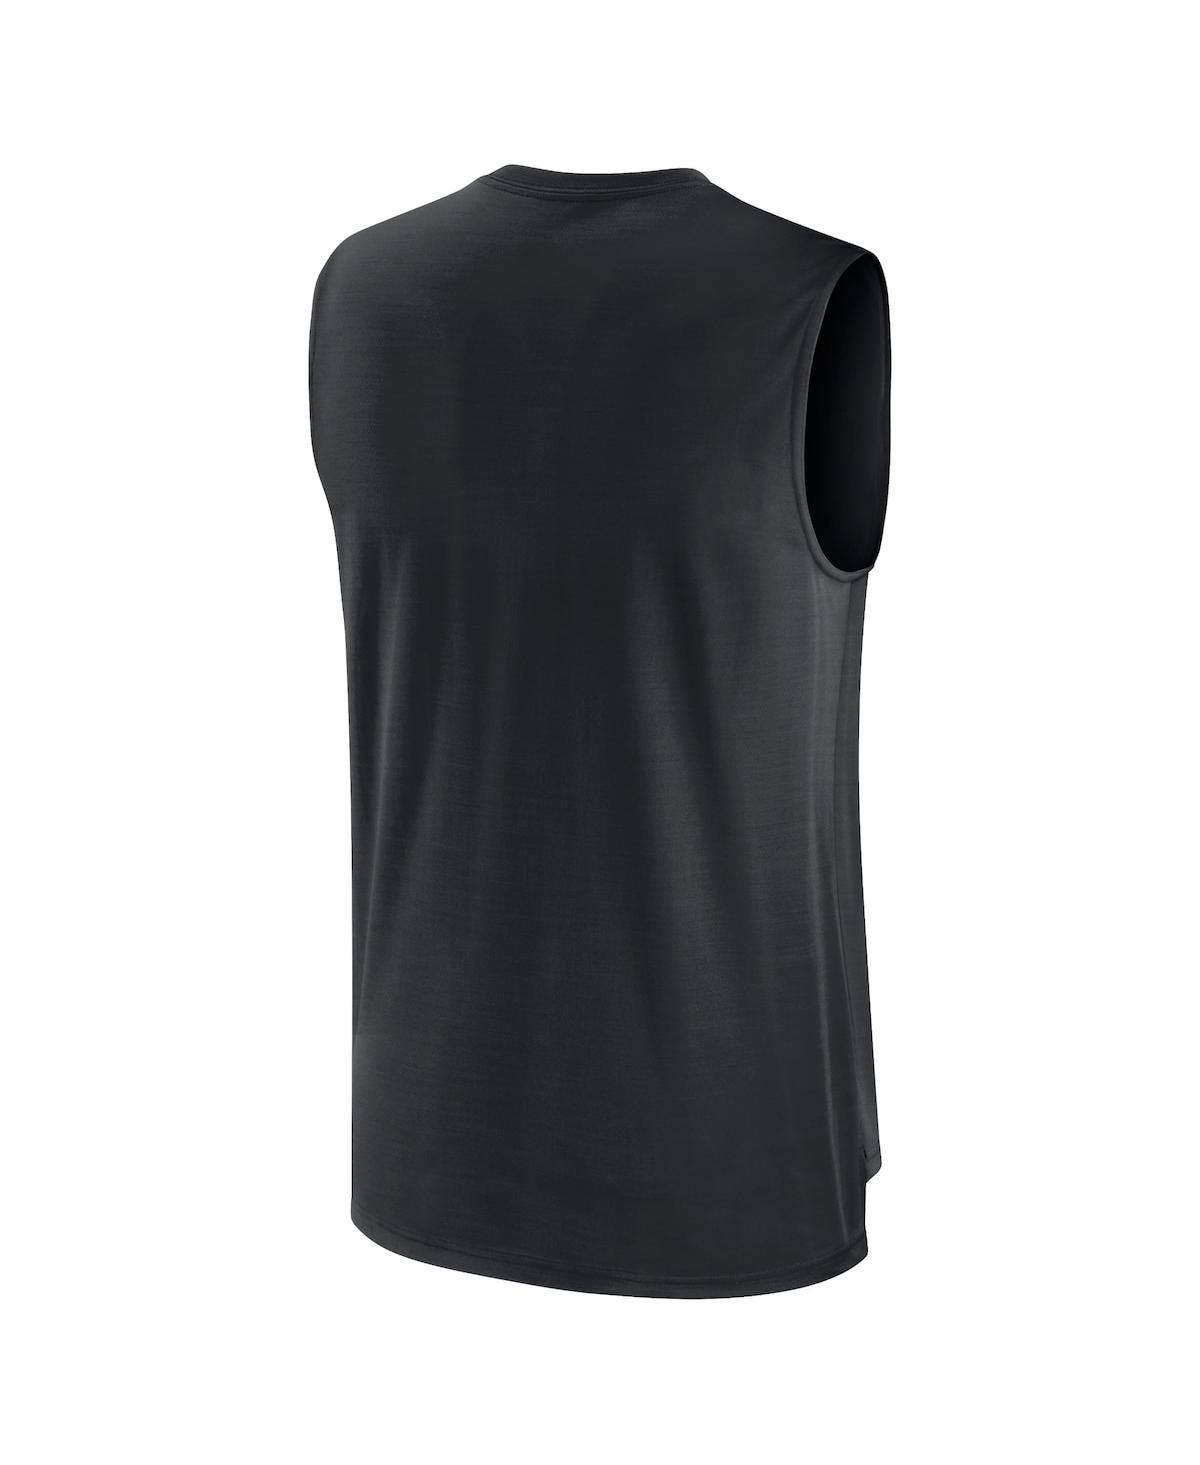 Shop Nike Men's  Black Chicago White Sox Knockout Stack Exceed Performance Muscle Tank Top